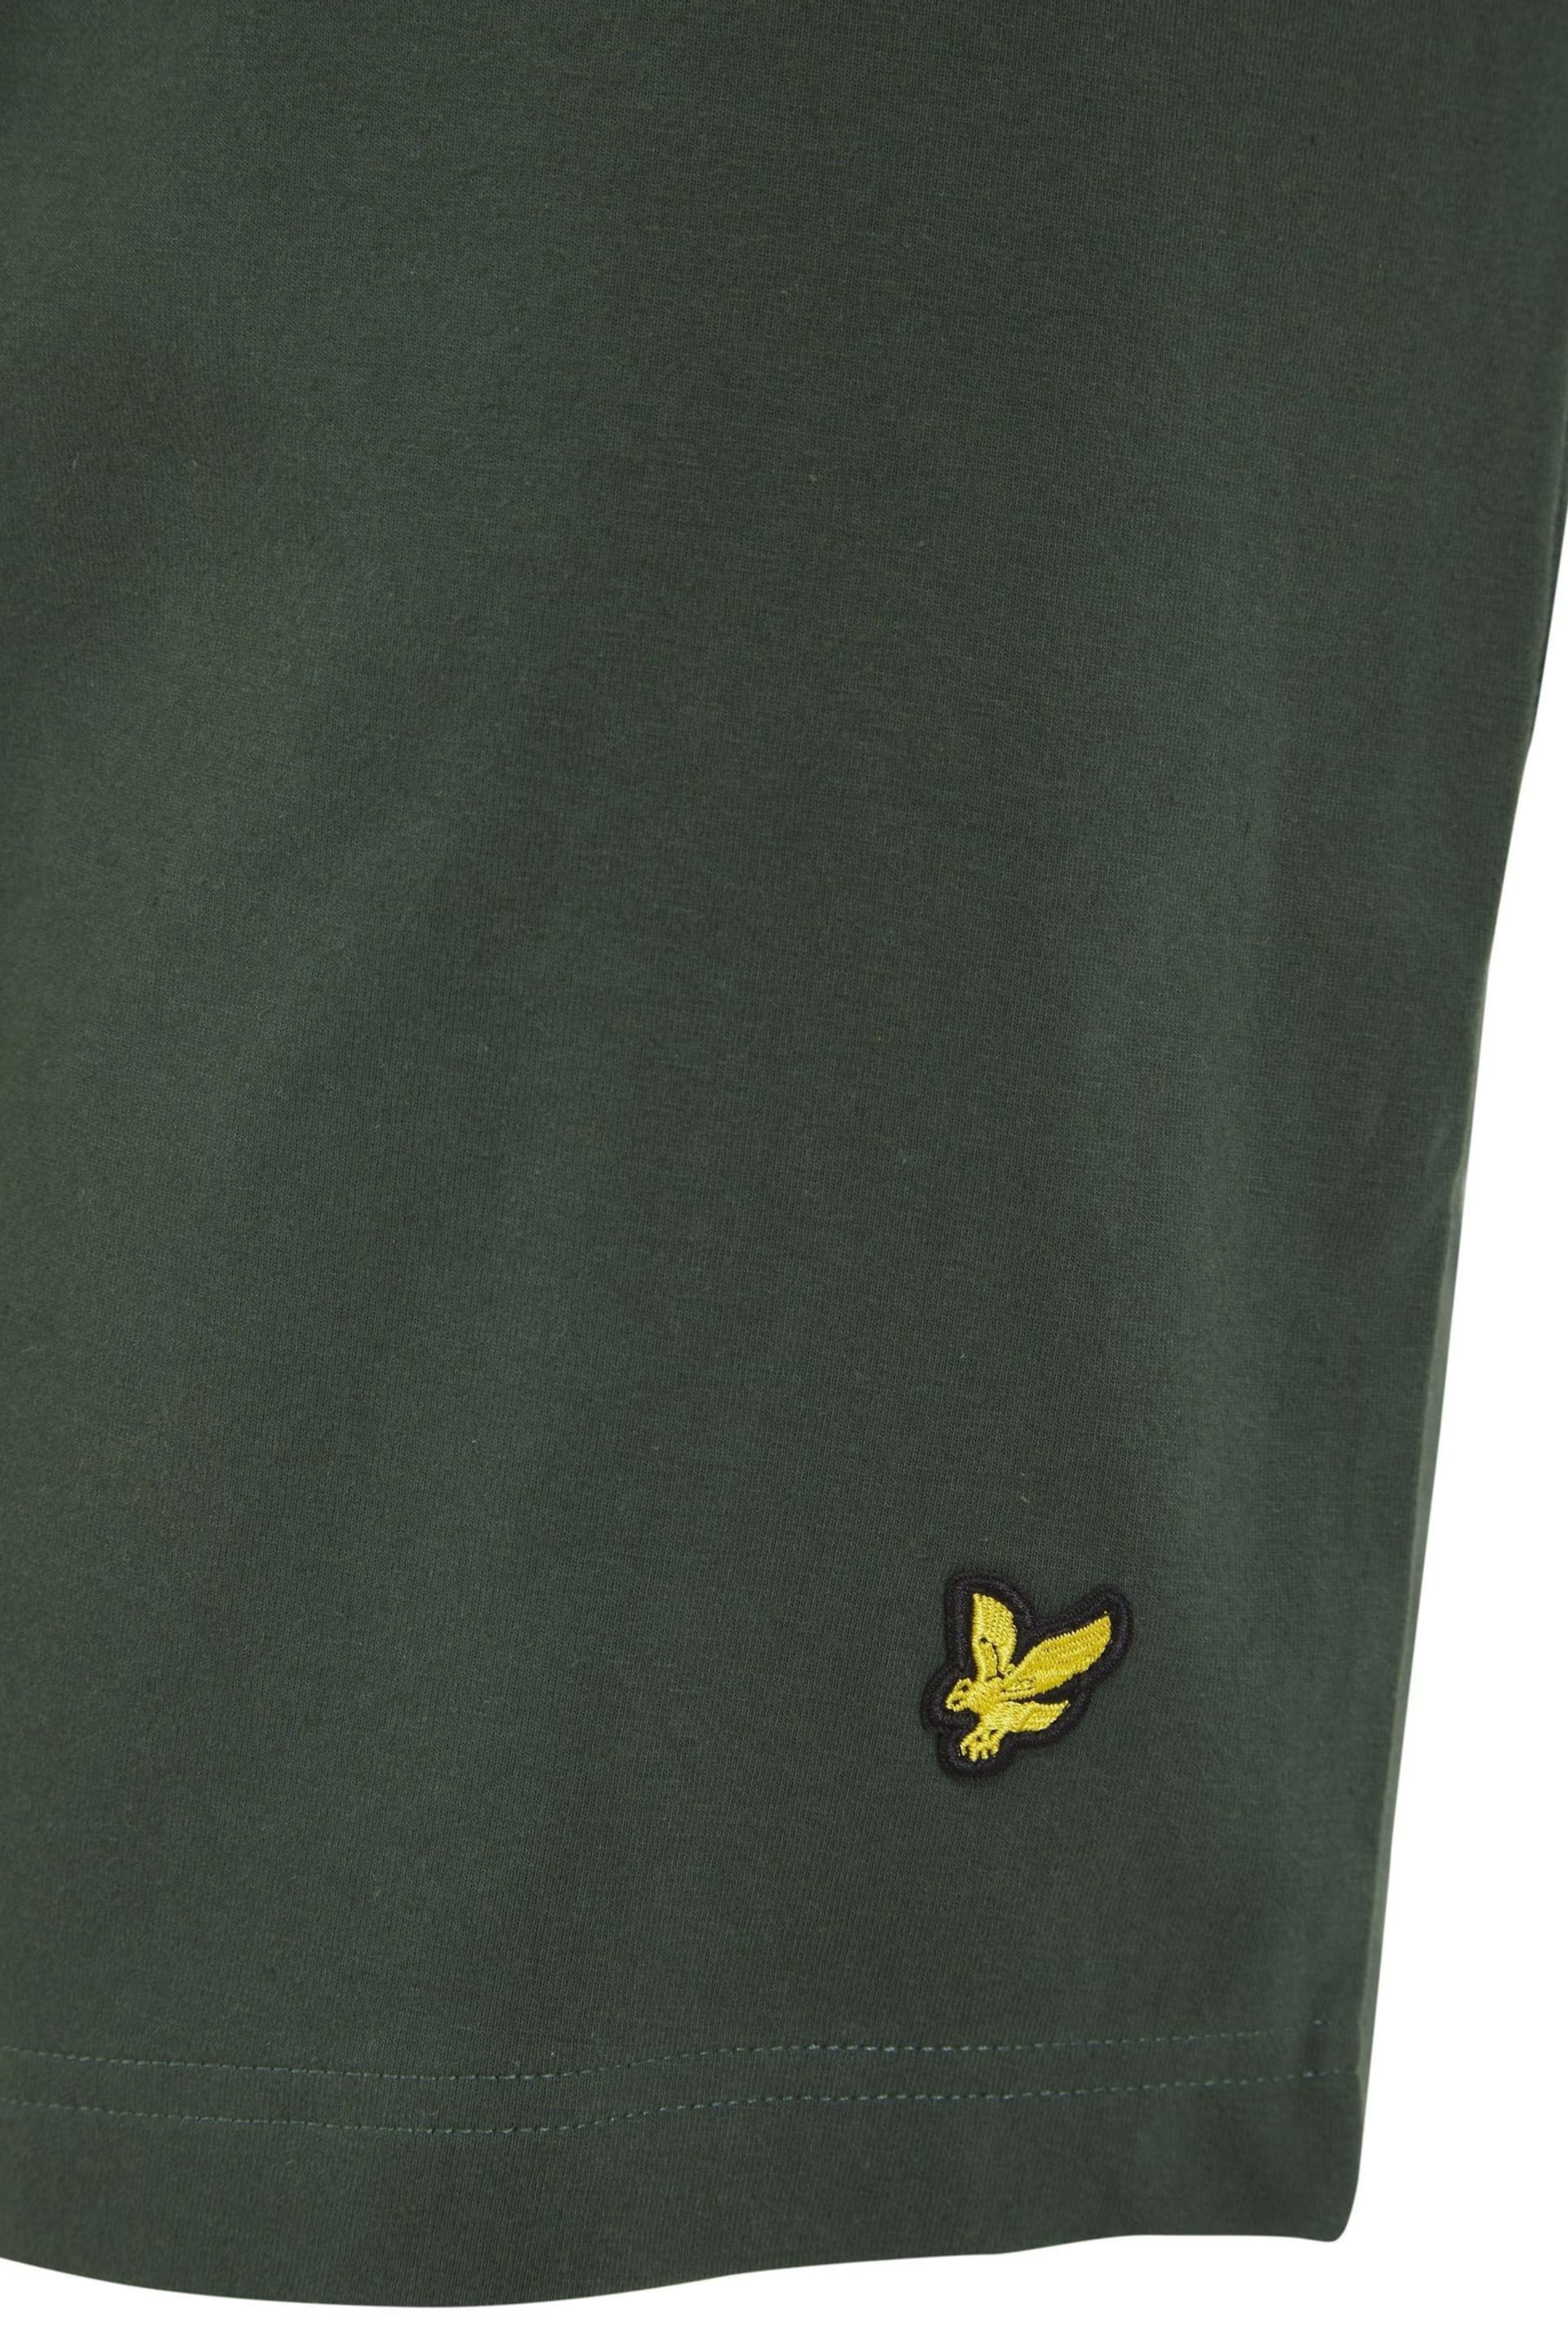 Lyle and Scott Green Charlie T-Shirt and Short Set - Image 5 of 6